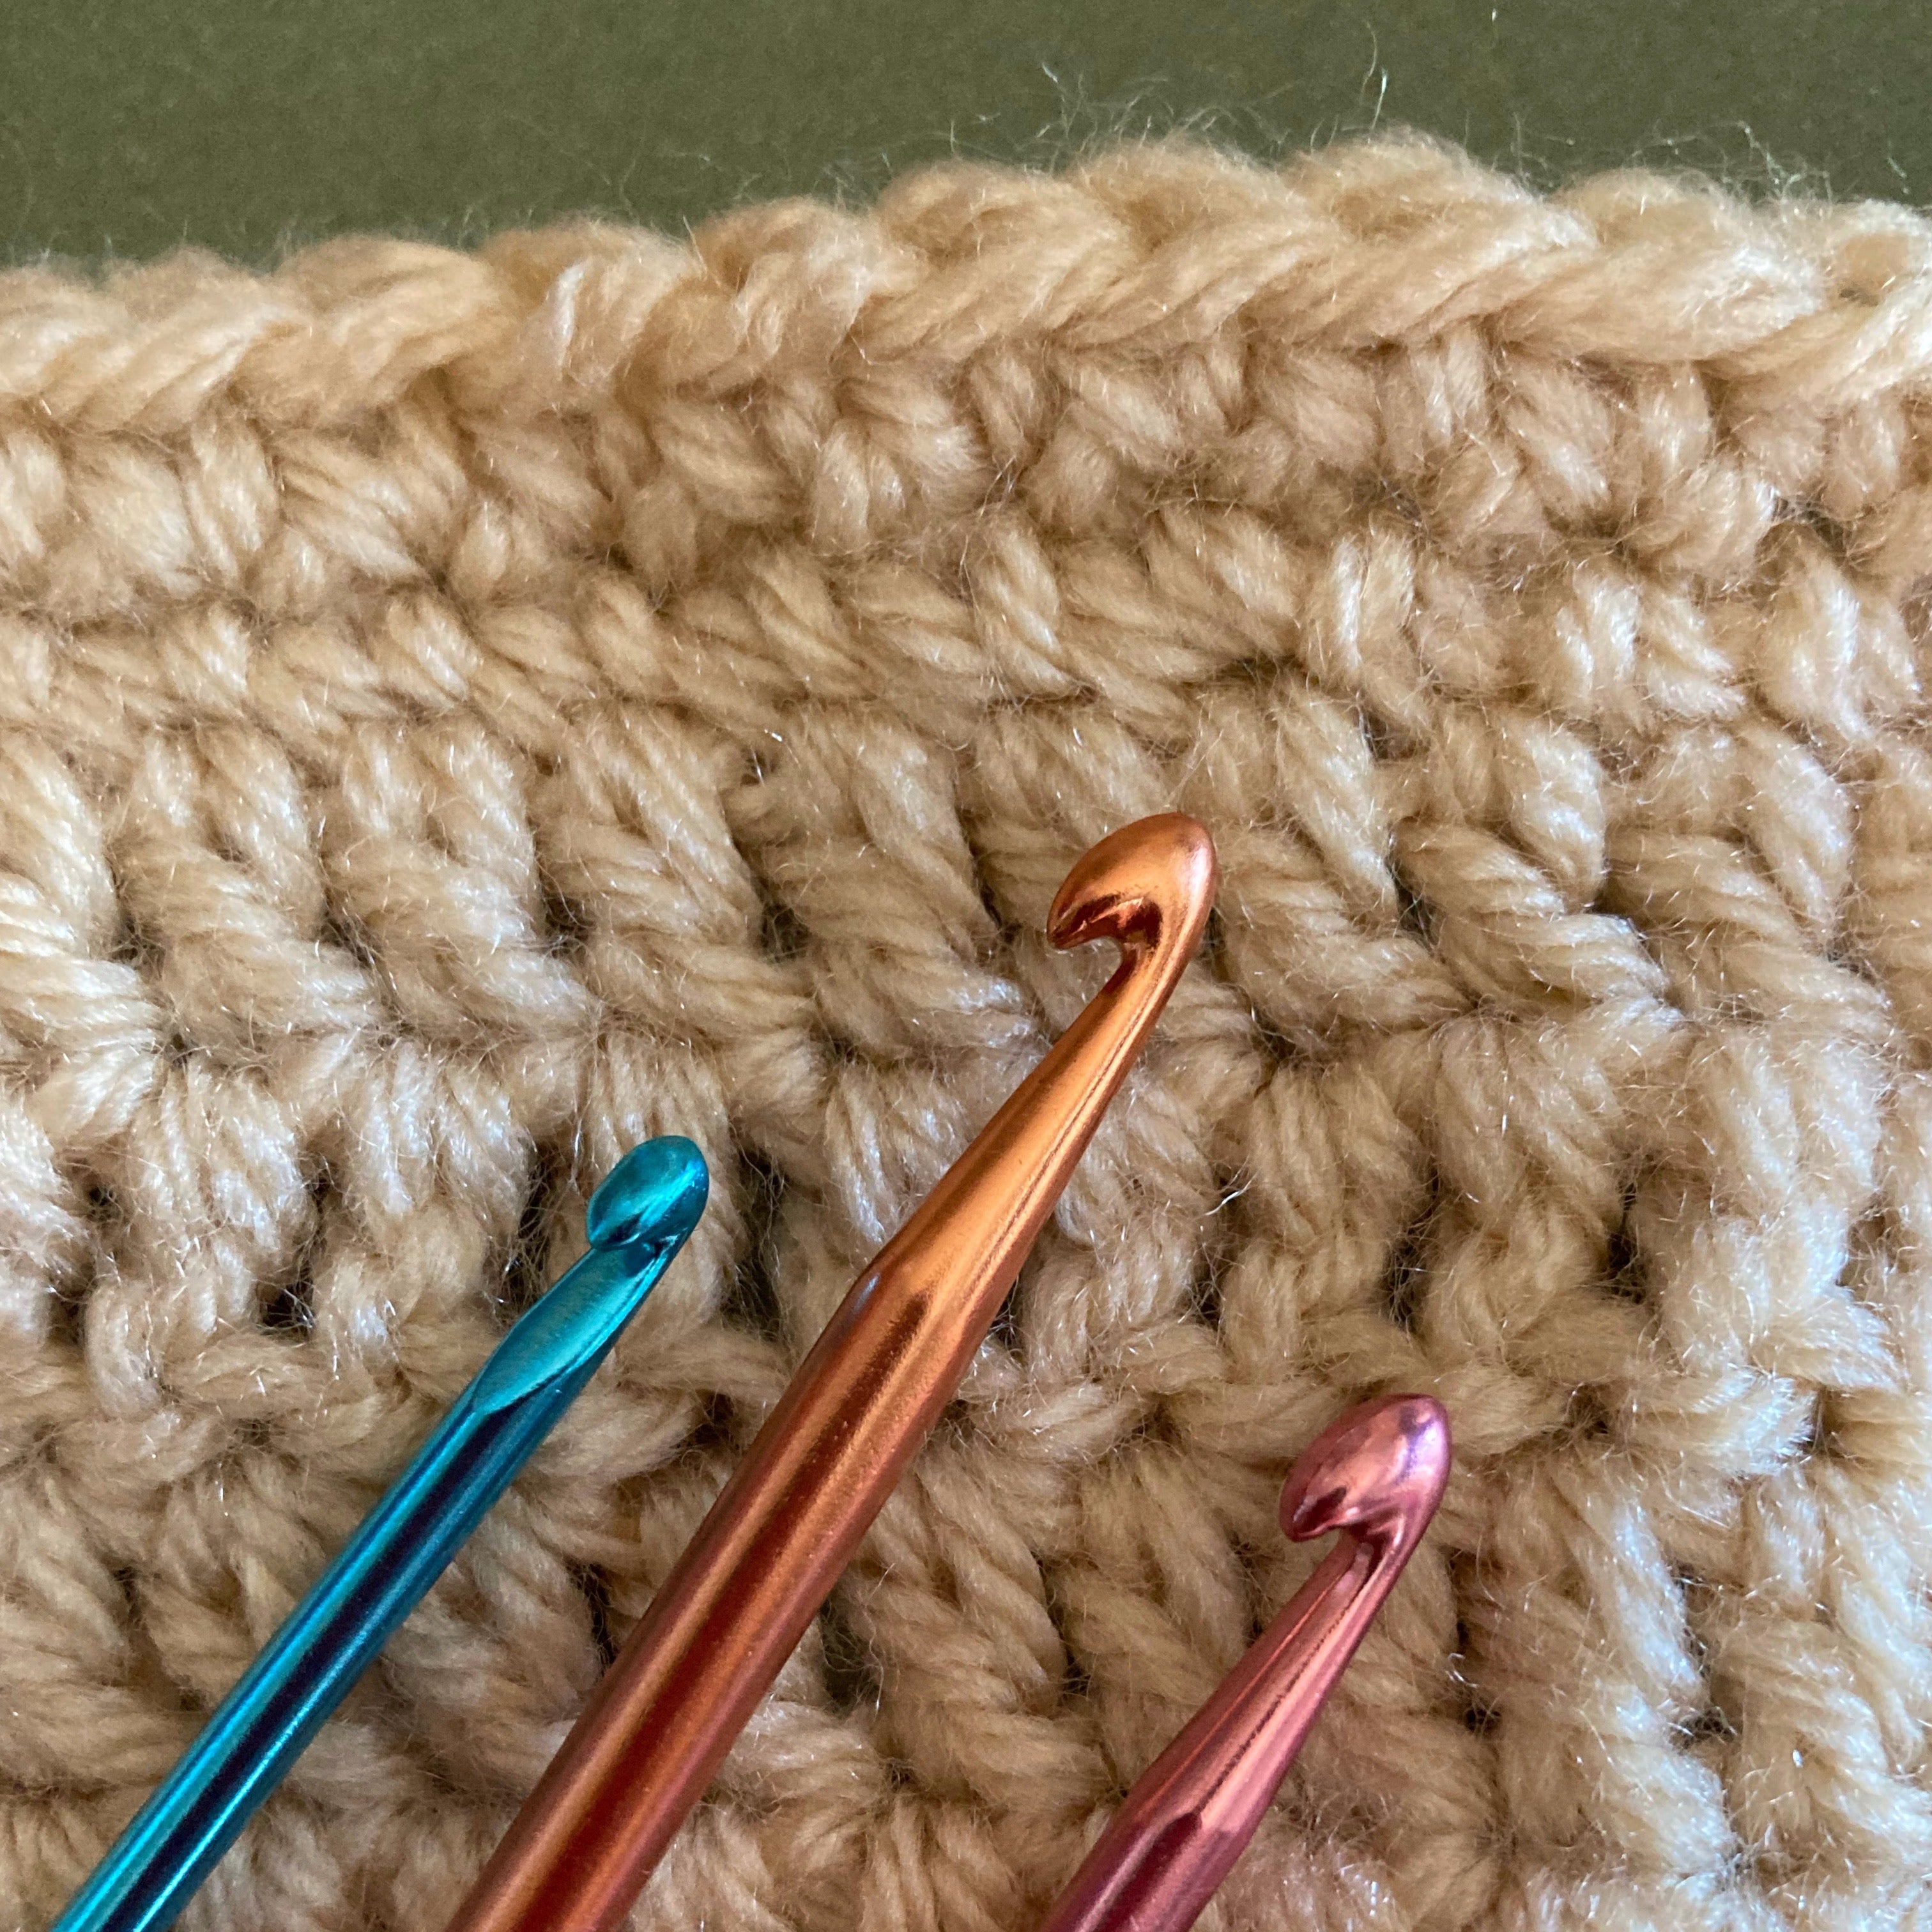 Crochet 101 (v) - February 27, March 5 and 12